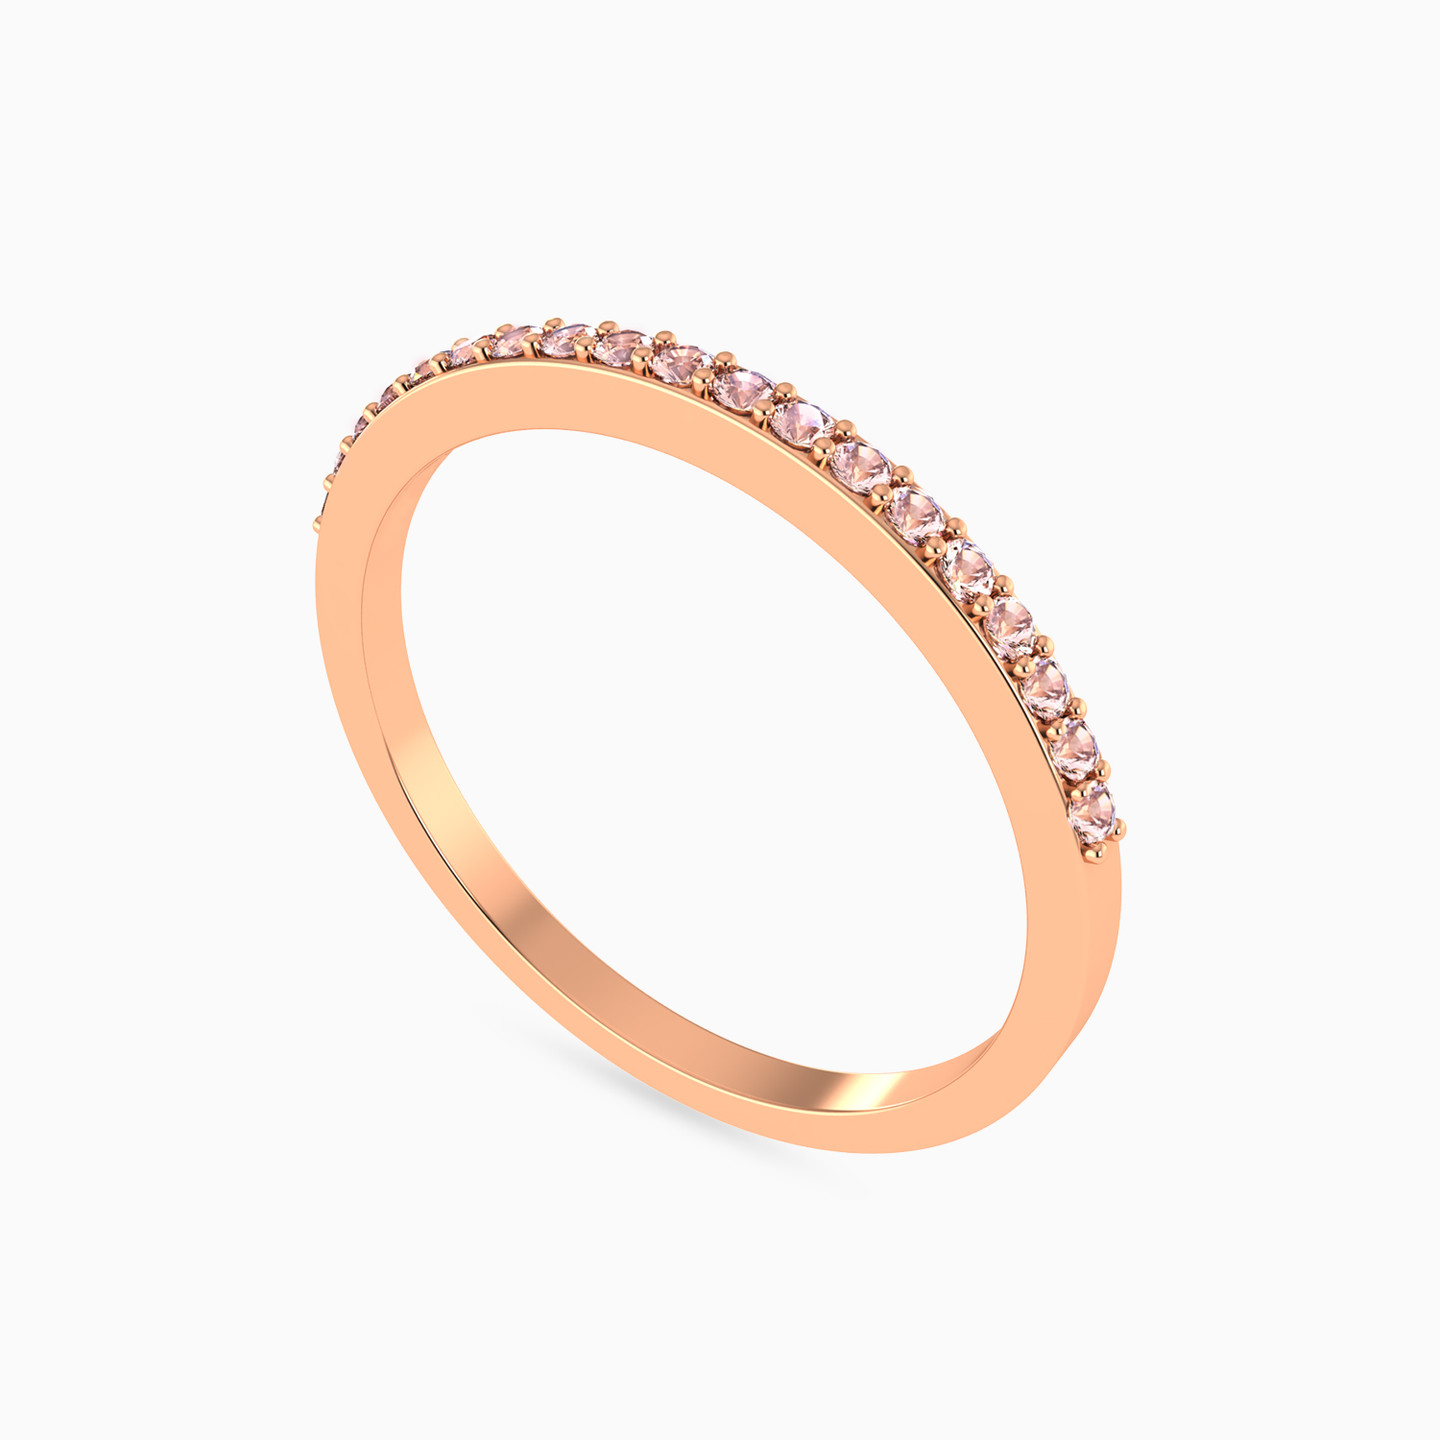 18K Gold Colored Stones Eternity Ring - 2